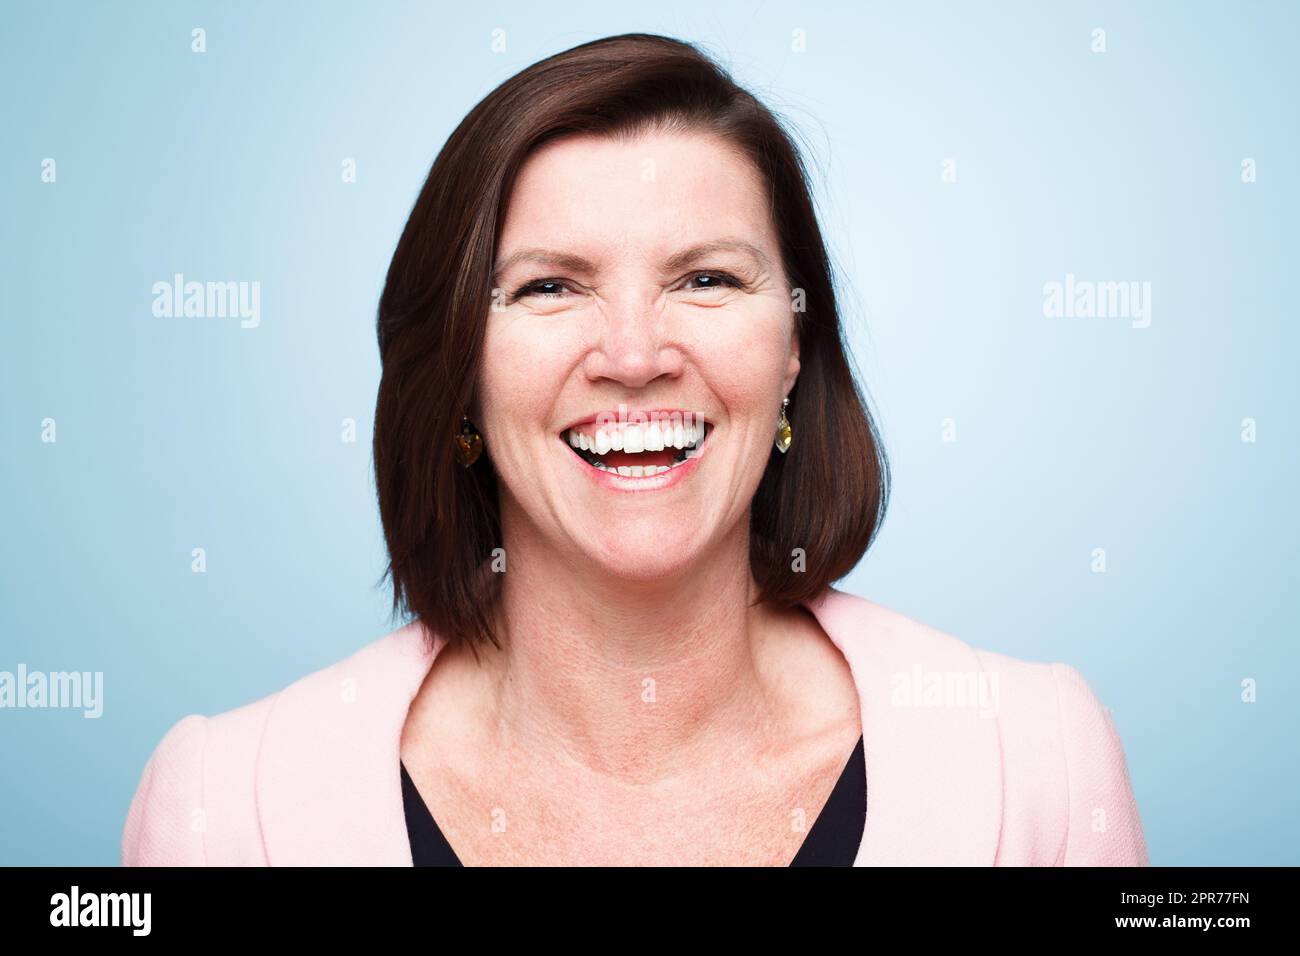 Spreading love and joy. Shot of a mature woman smiling against a studio background. Stock Photo